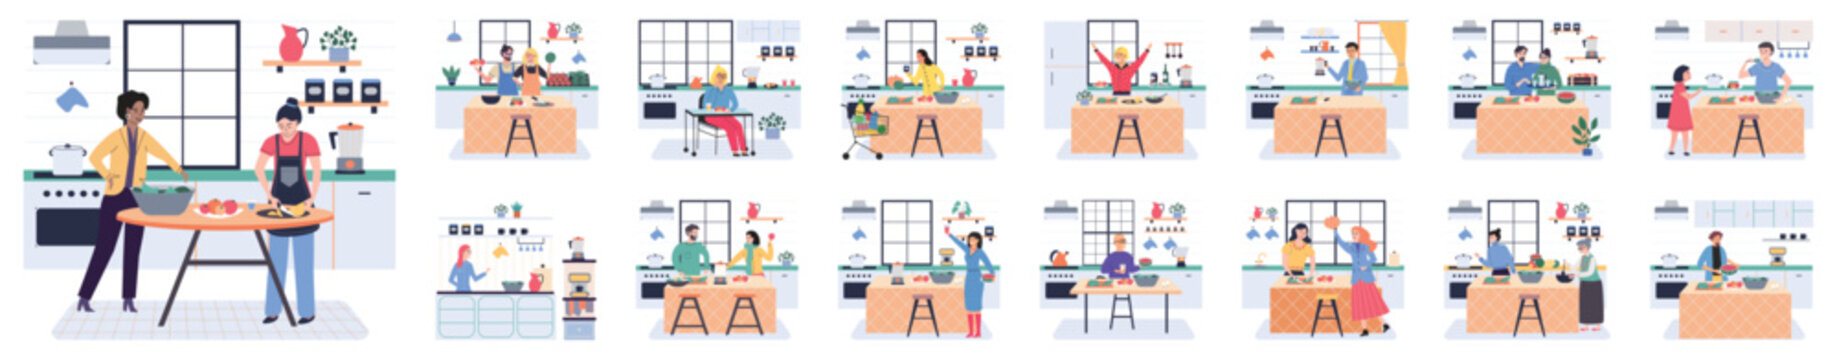 People cooking vegetarian food. Vector illustration. Girl prepare dinner cutting vegetables for salad. People cook food at home. Smiling people cooking on home interior kitchen table